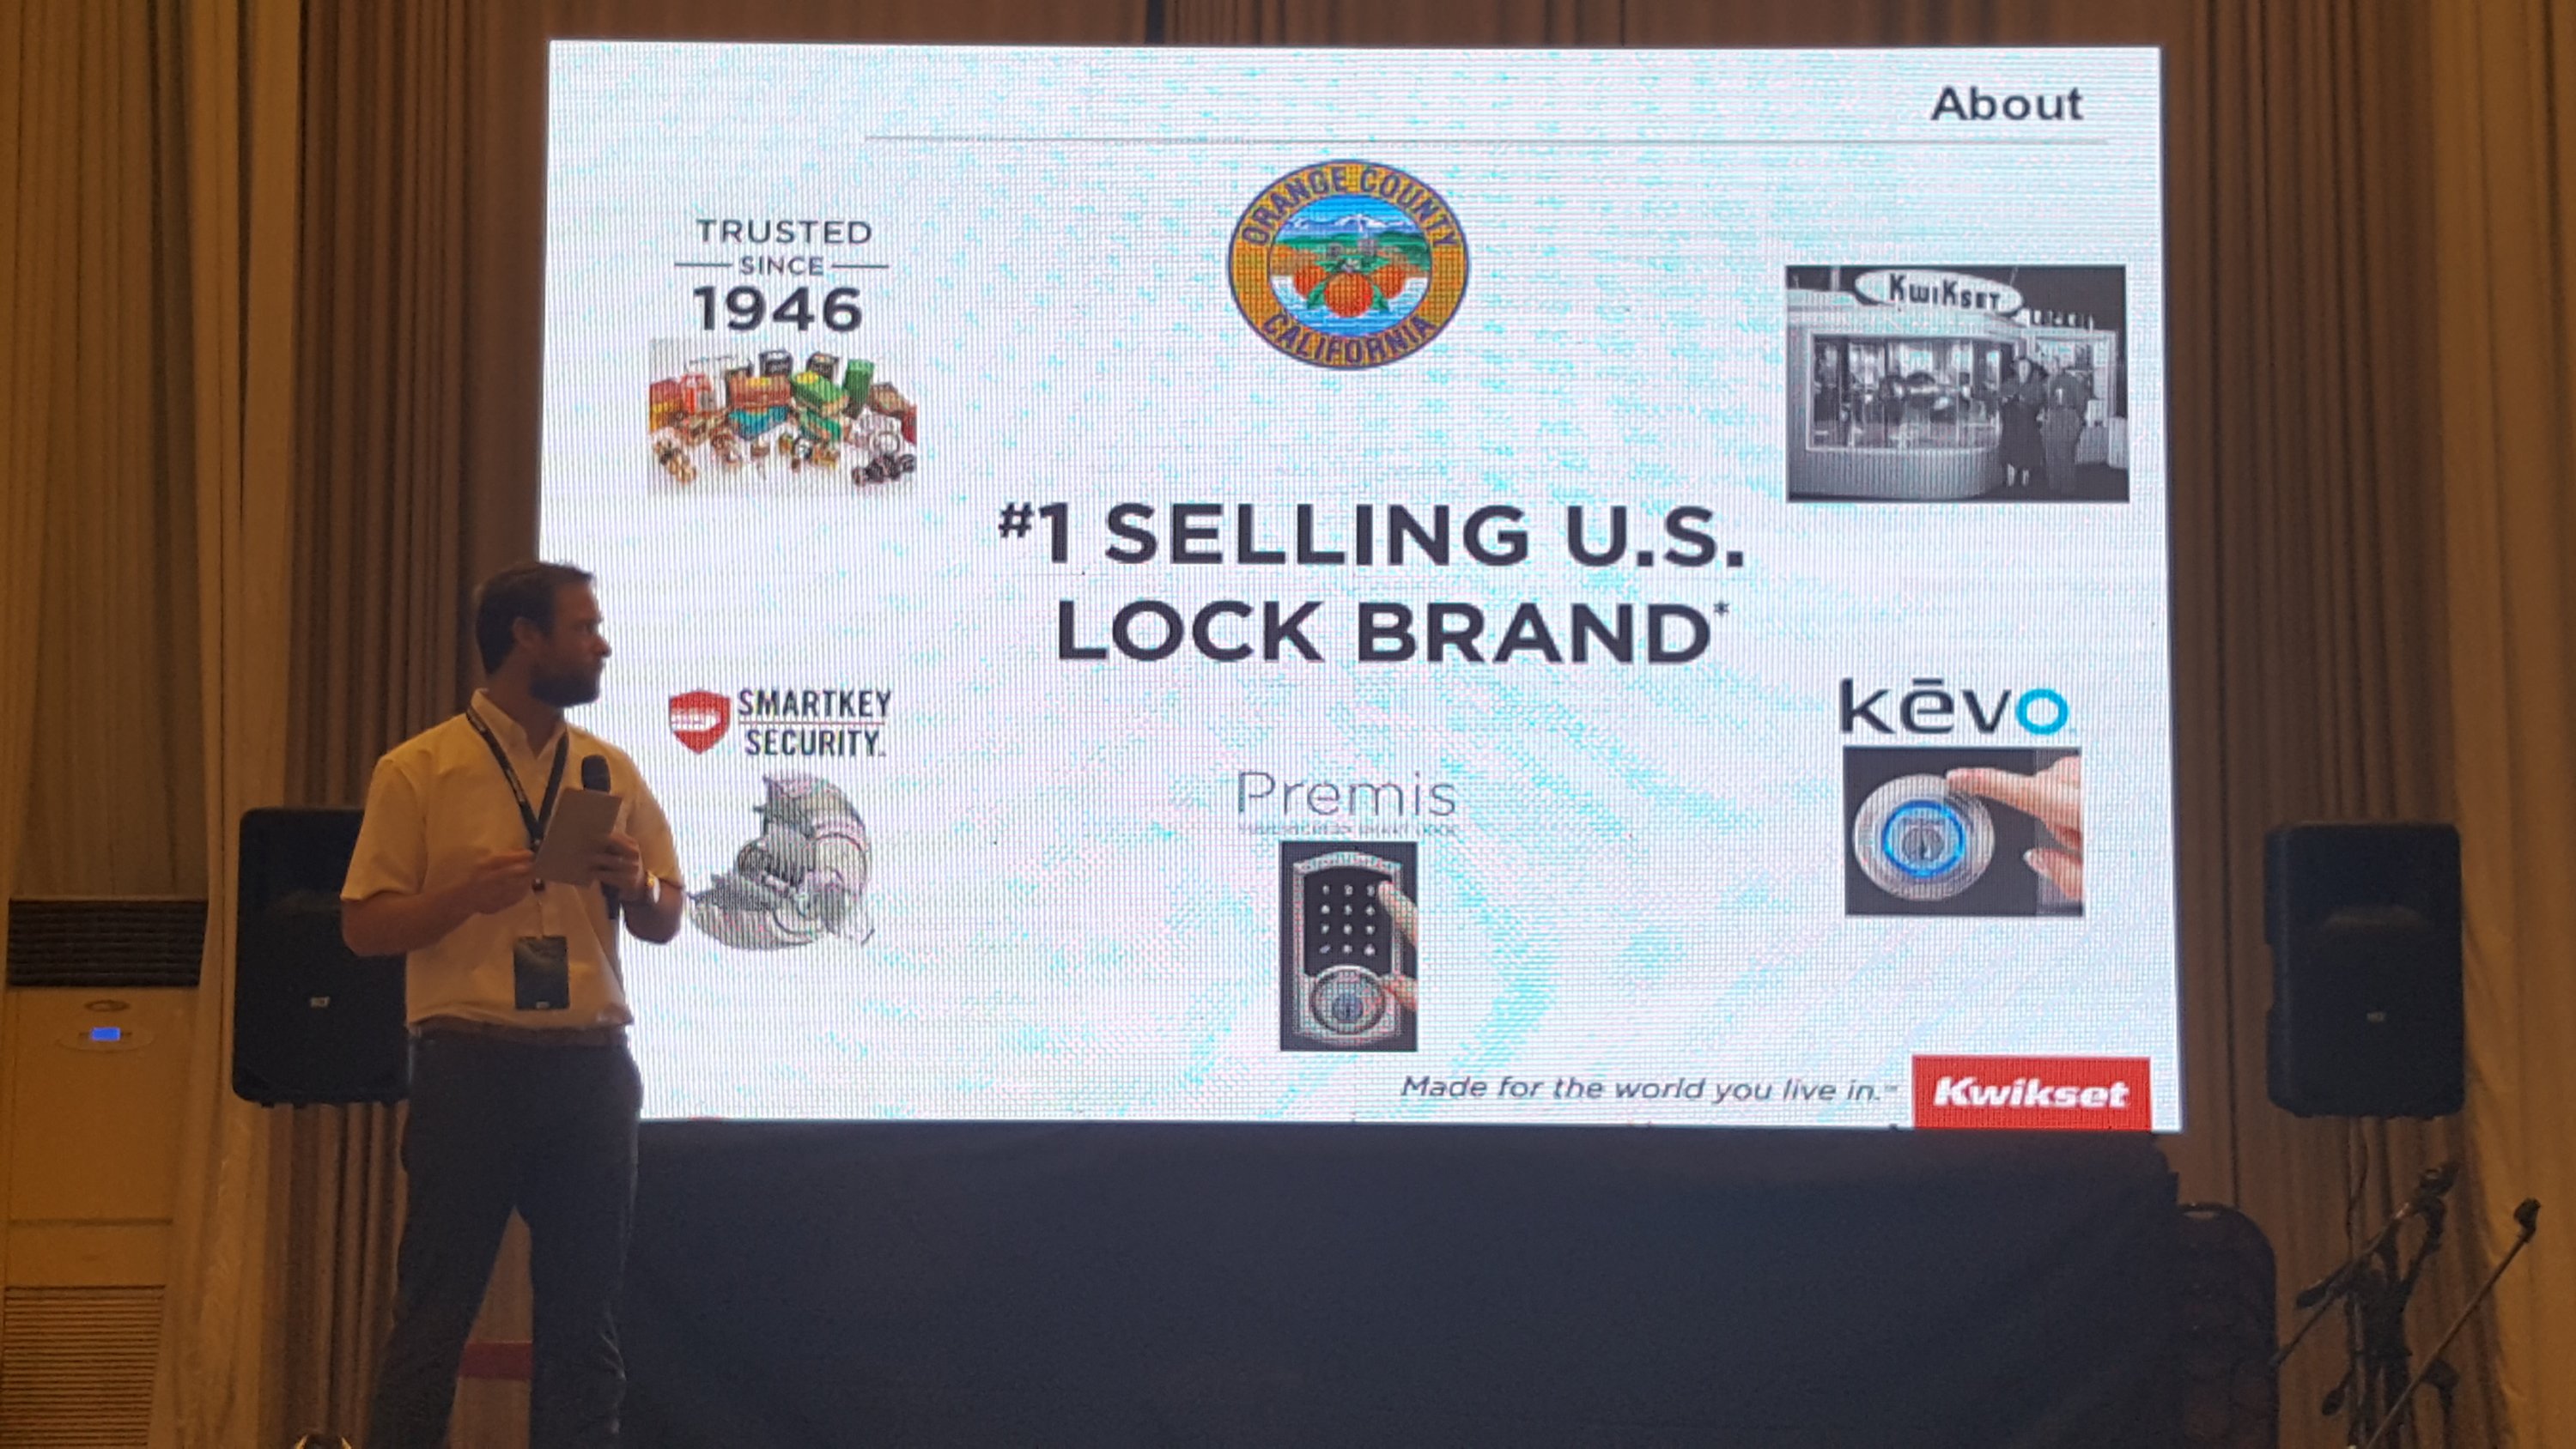 Kevin Sander, International Brand Manager, discussing Kwikset's brand's premise and promise that is 